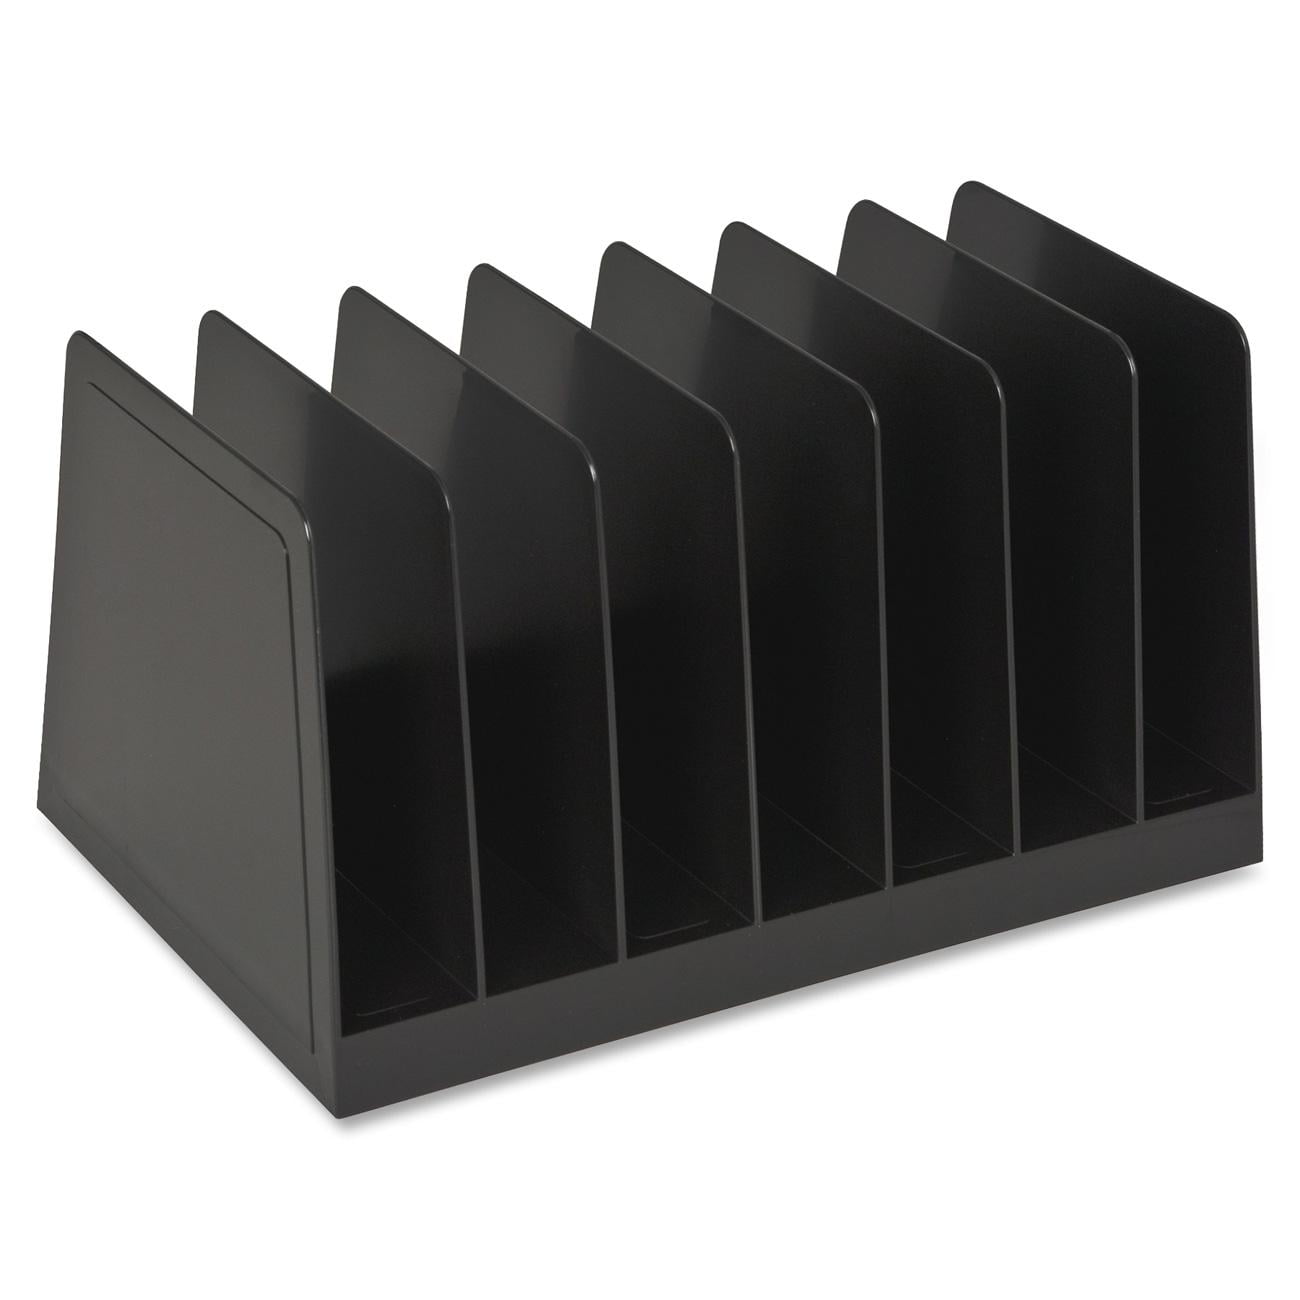 FixtureDisplays® Construction Paper Storage Bin 15 Slot Vertical File  Compartment Organizer for Home, Office, Classroom 32 X 13 X 17, Slot 10 X  3 15316